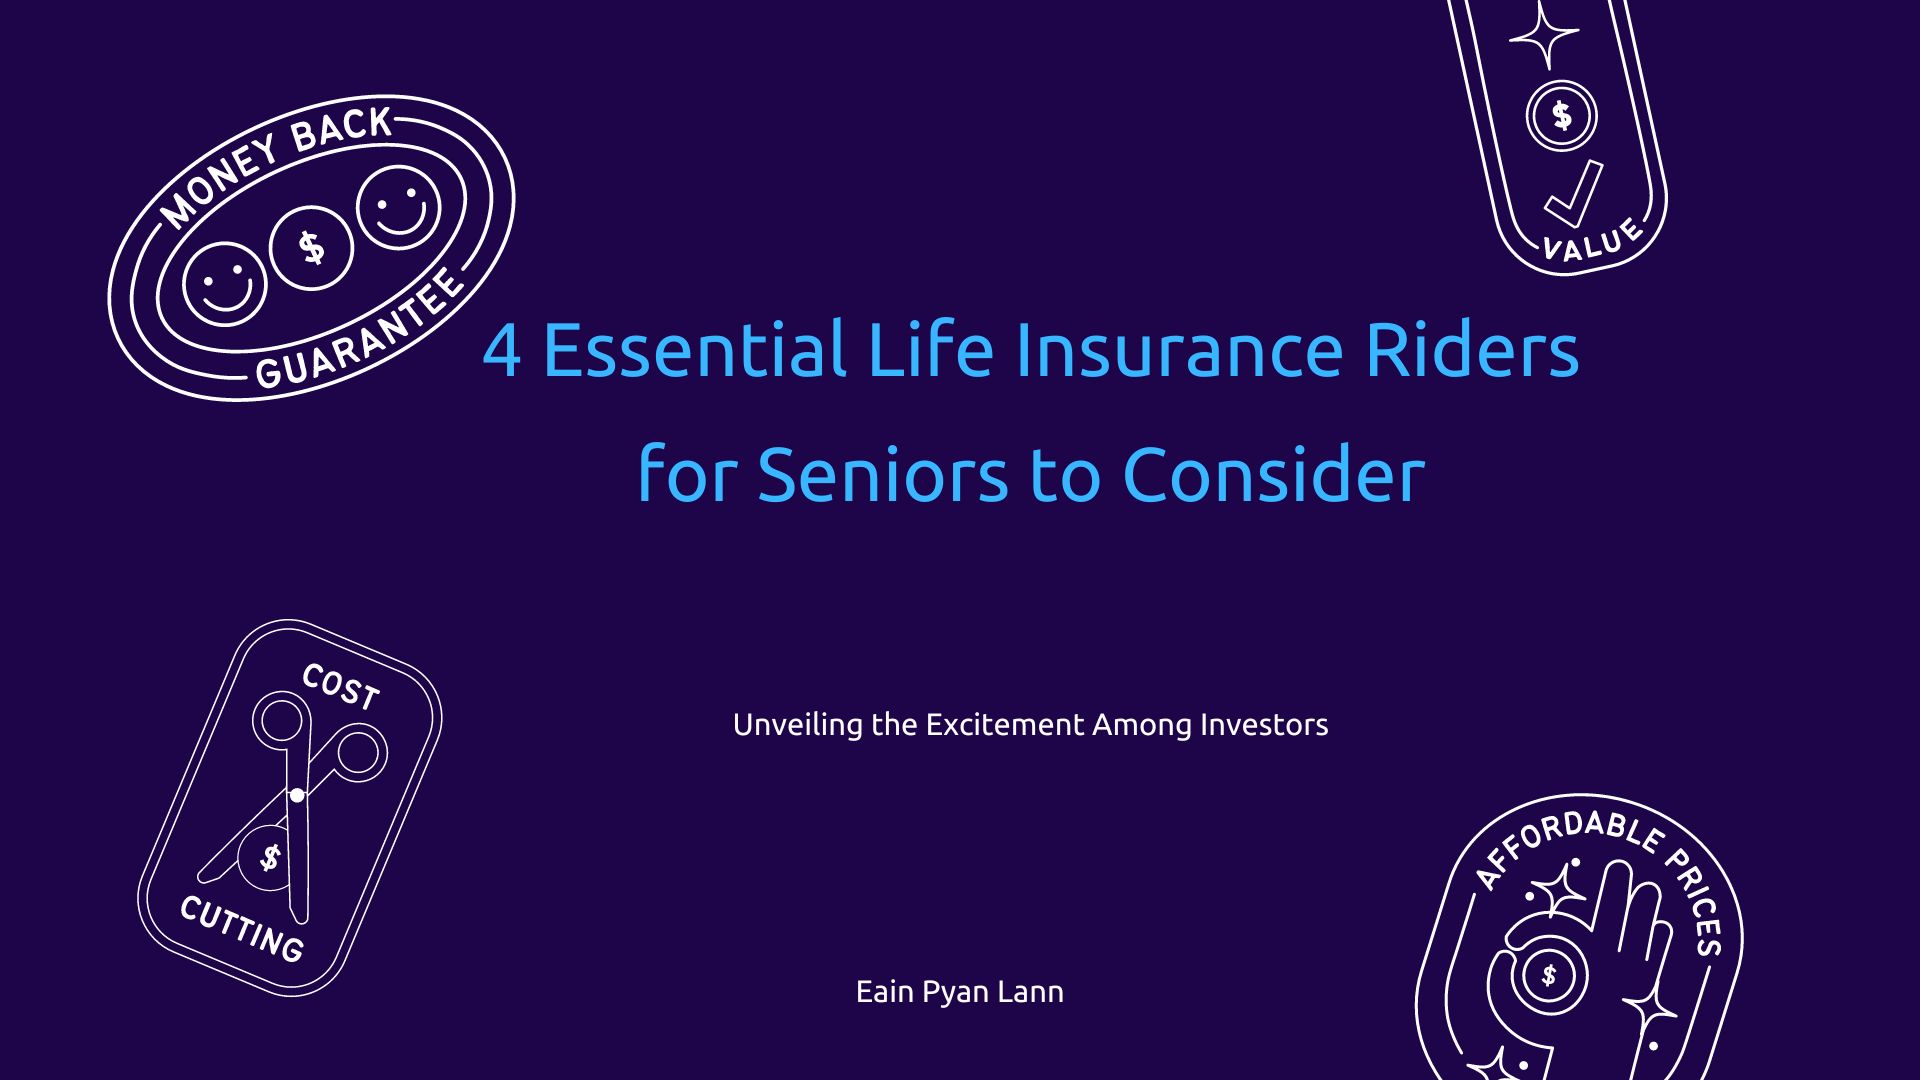 4 Essential Life Insurance Riders for Seniors to Consider